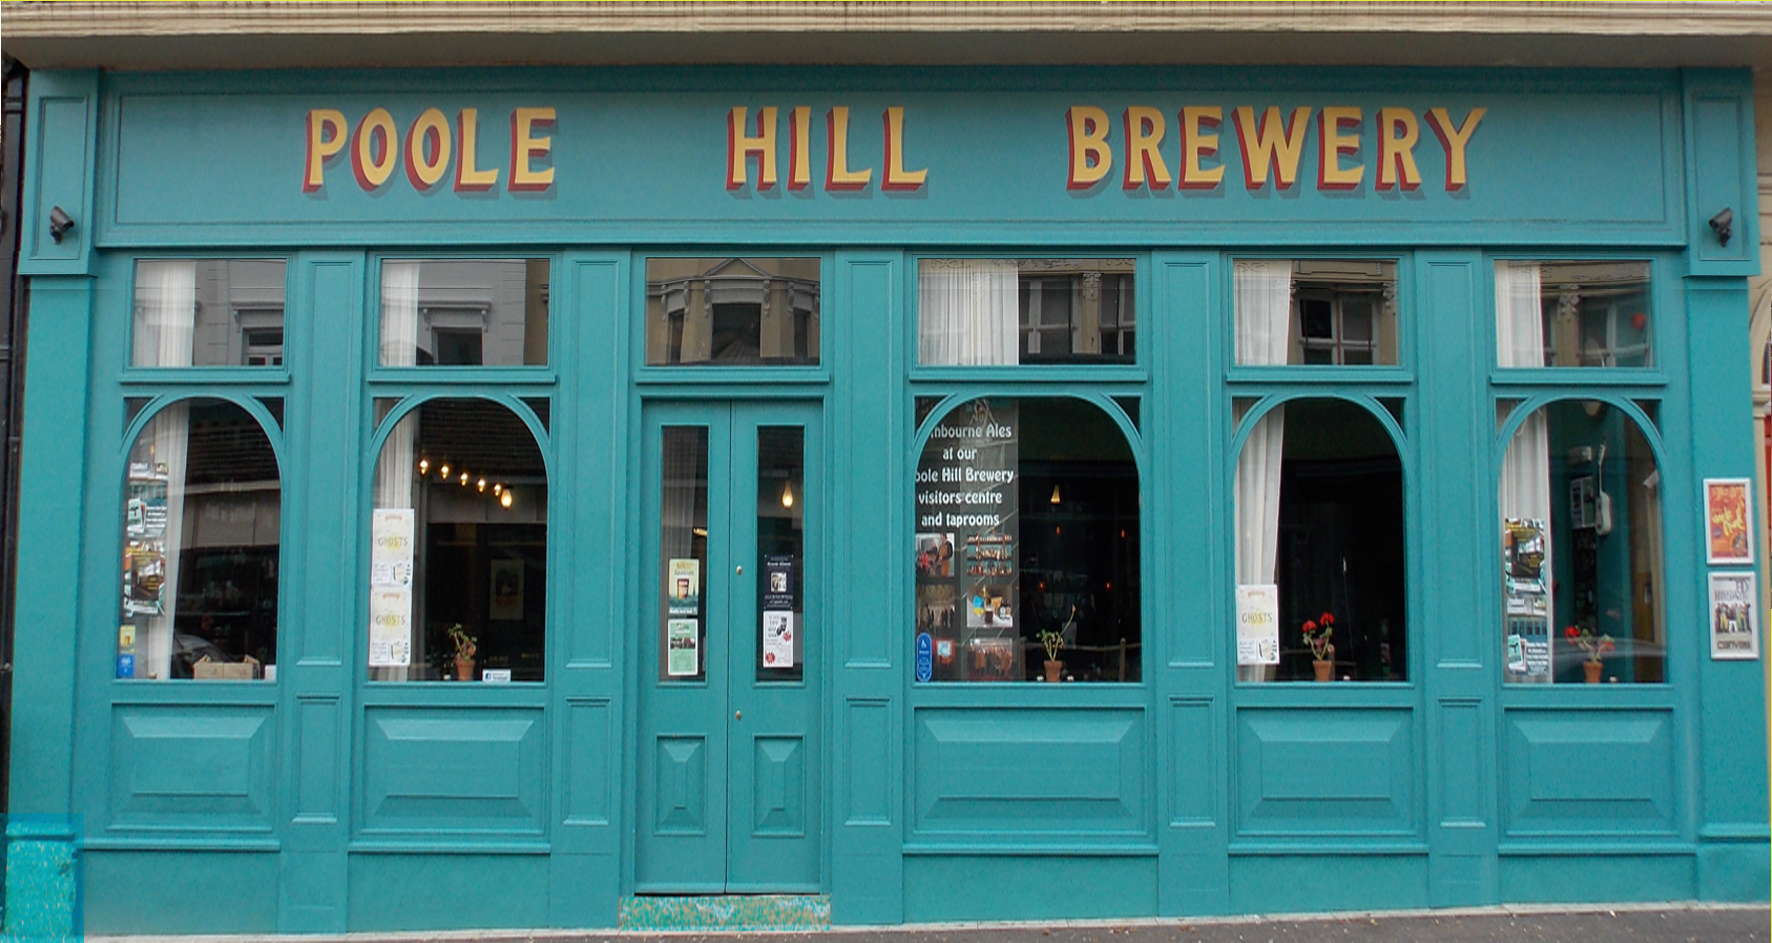 https://poolehillbrewery.com/wp-content/uploads/2019/04/001-Poole-Hill-Brewery-Frontage.jpg